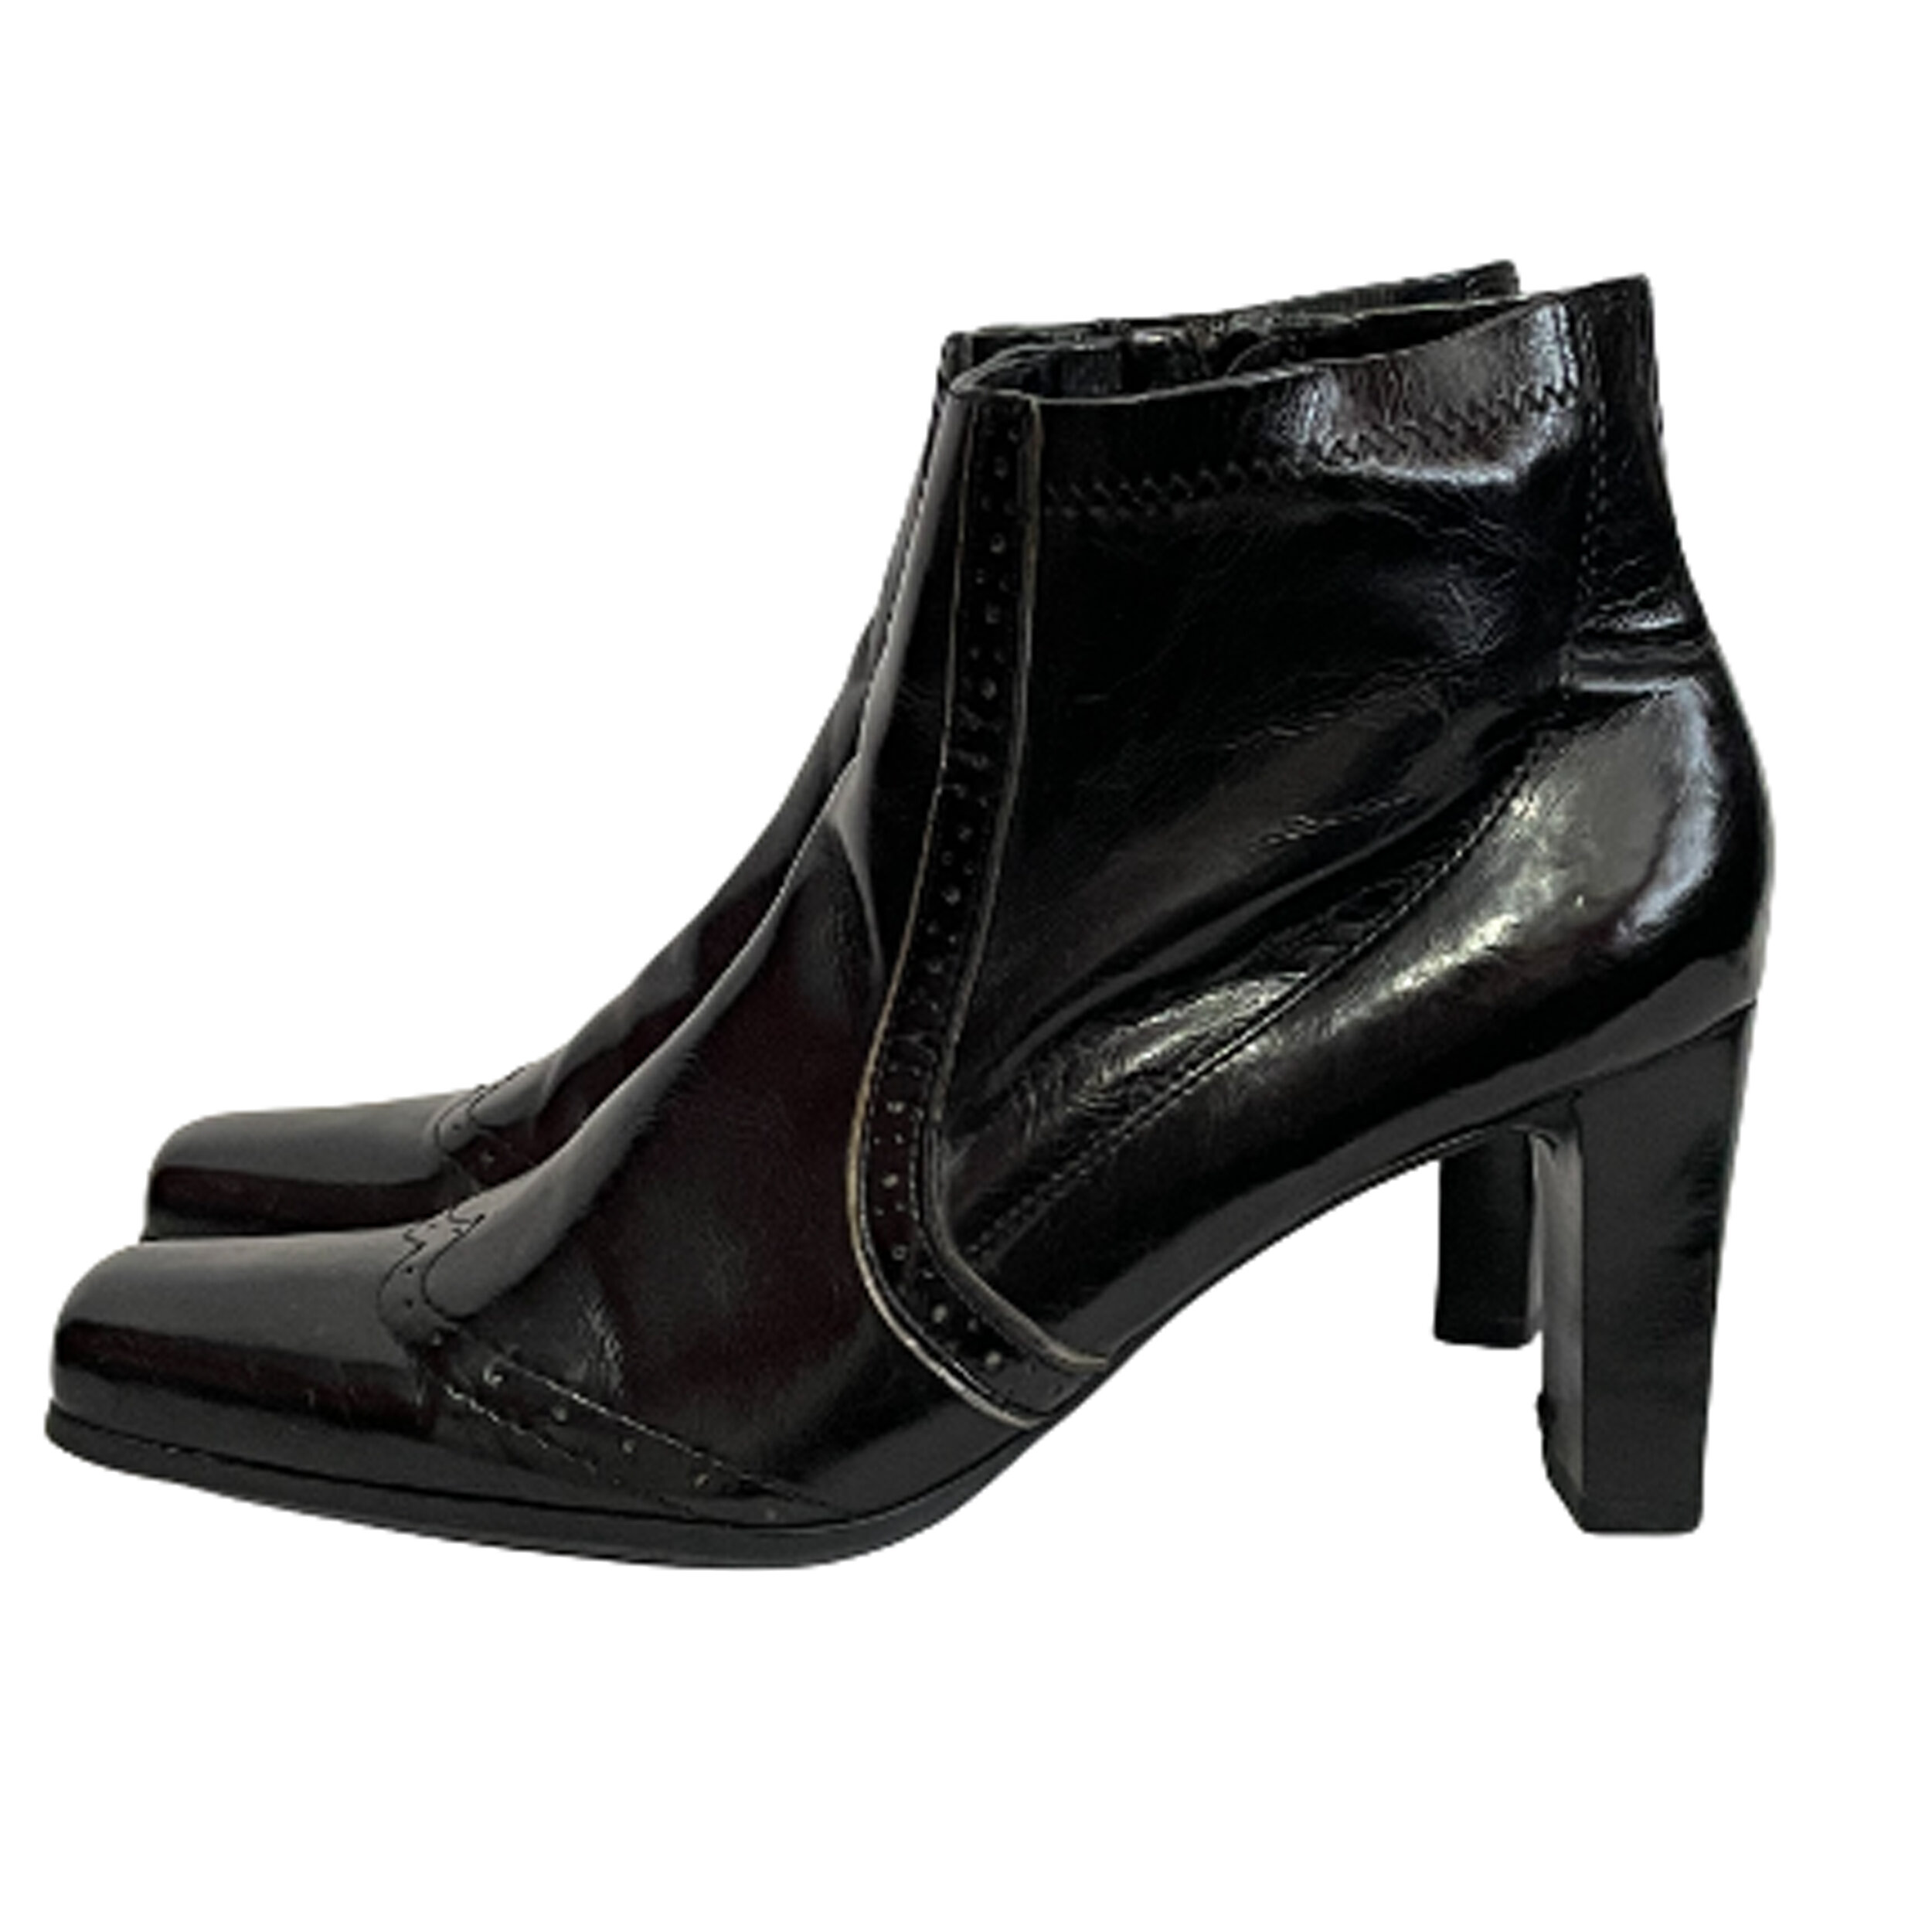 Patent Leather Ankle Boots | N°21 | Official Online Store